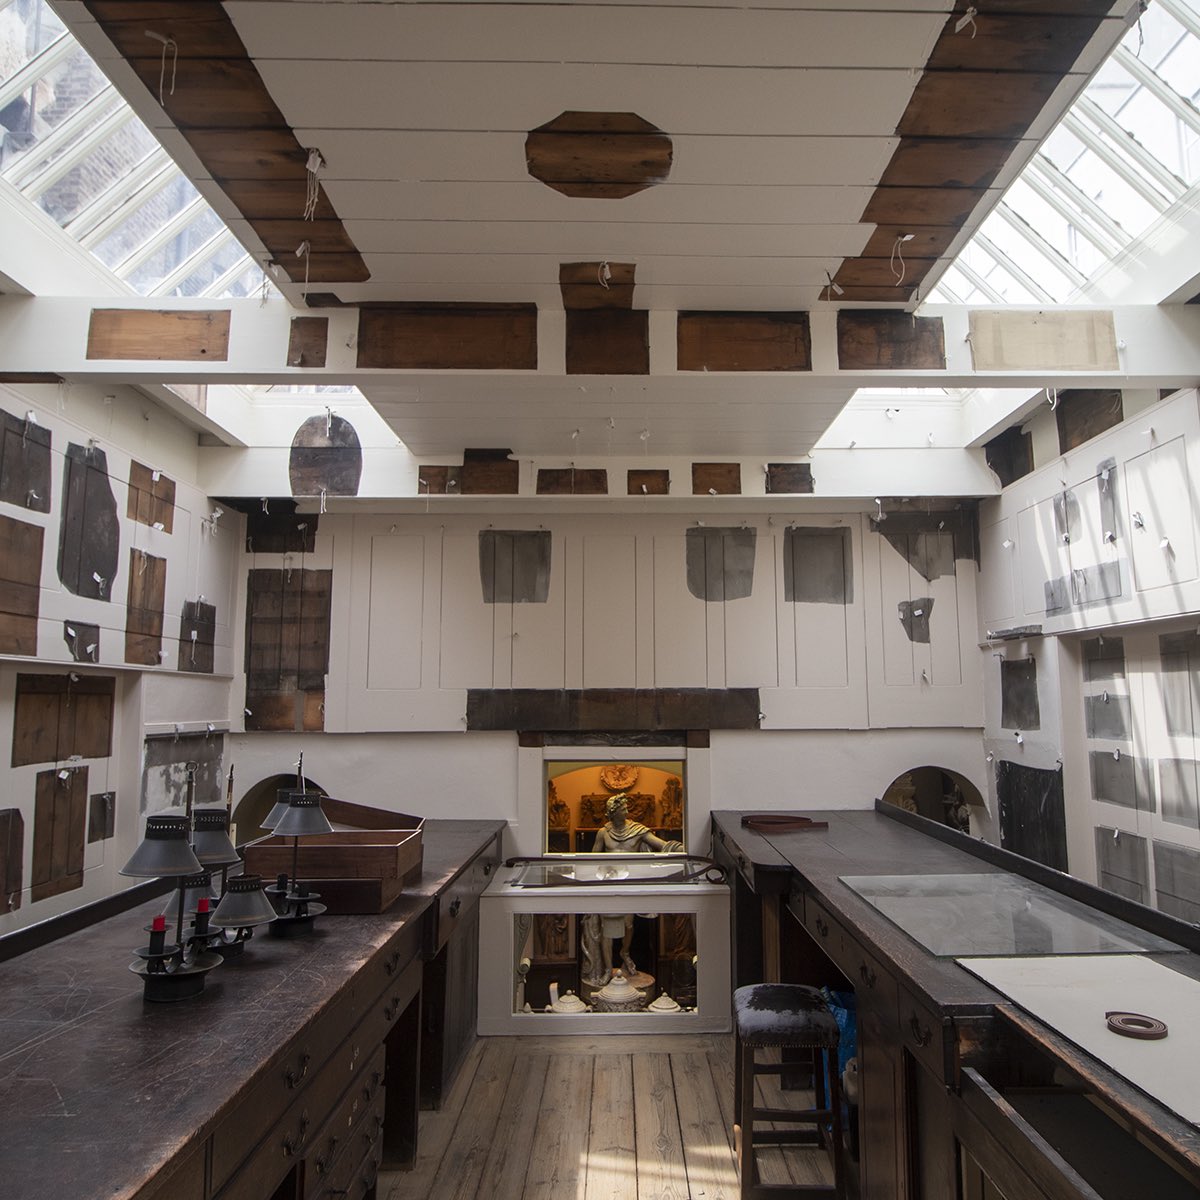 Applications now open for artist residencies in Sir John Soane’s historic Drawing Office 3 months £1500 honorarium + bursary for accommodation. Deadline 4 October soane.org/drawing-office…